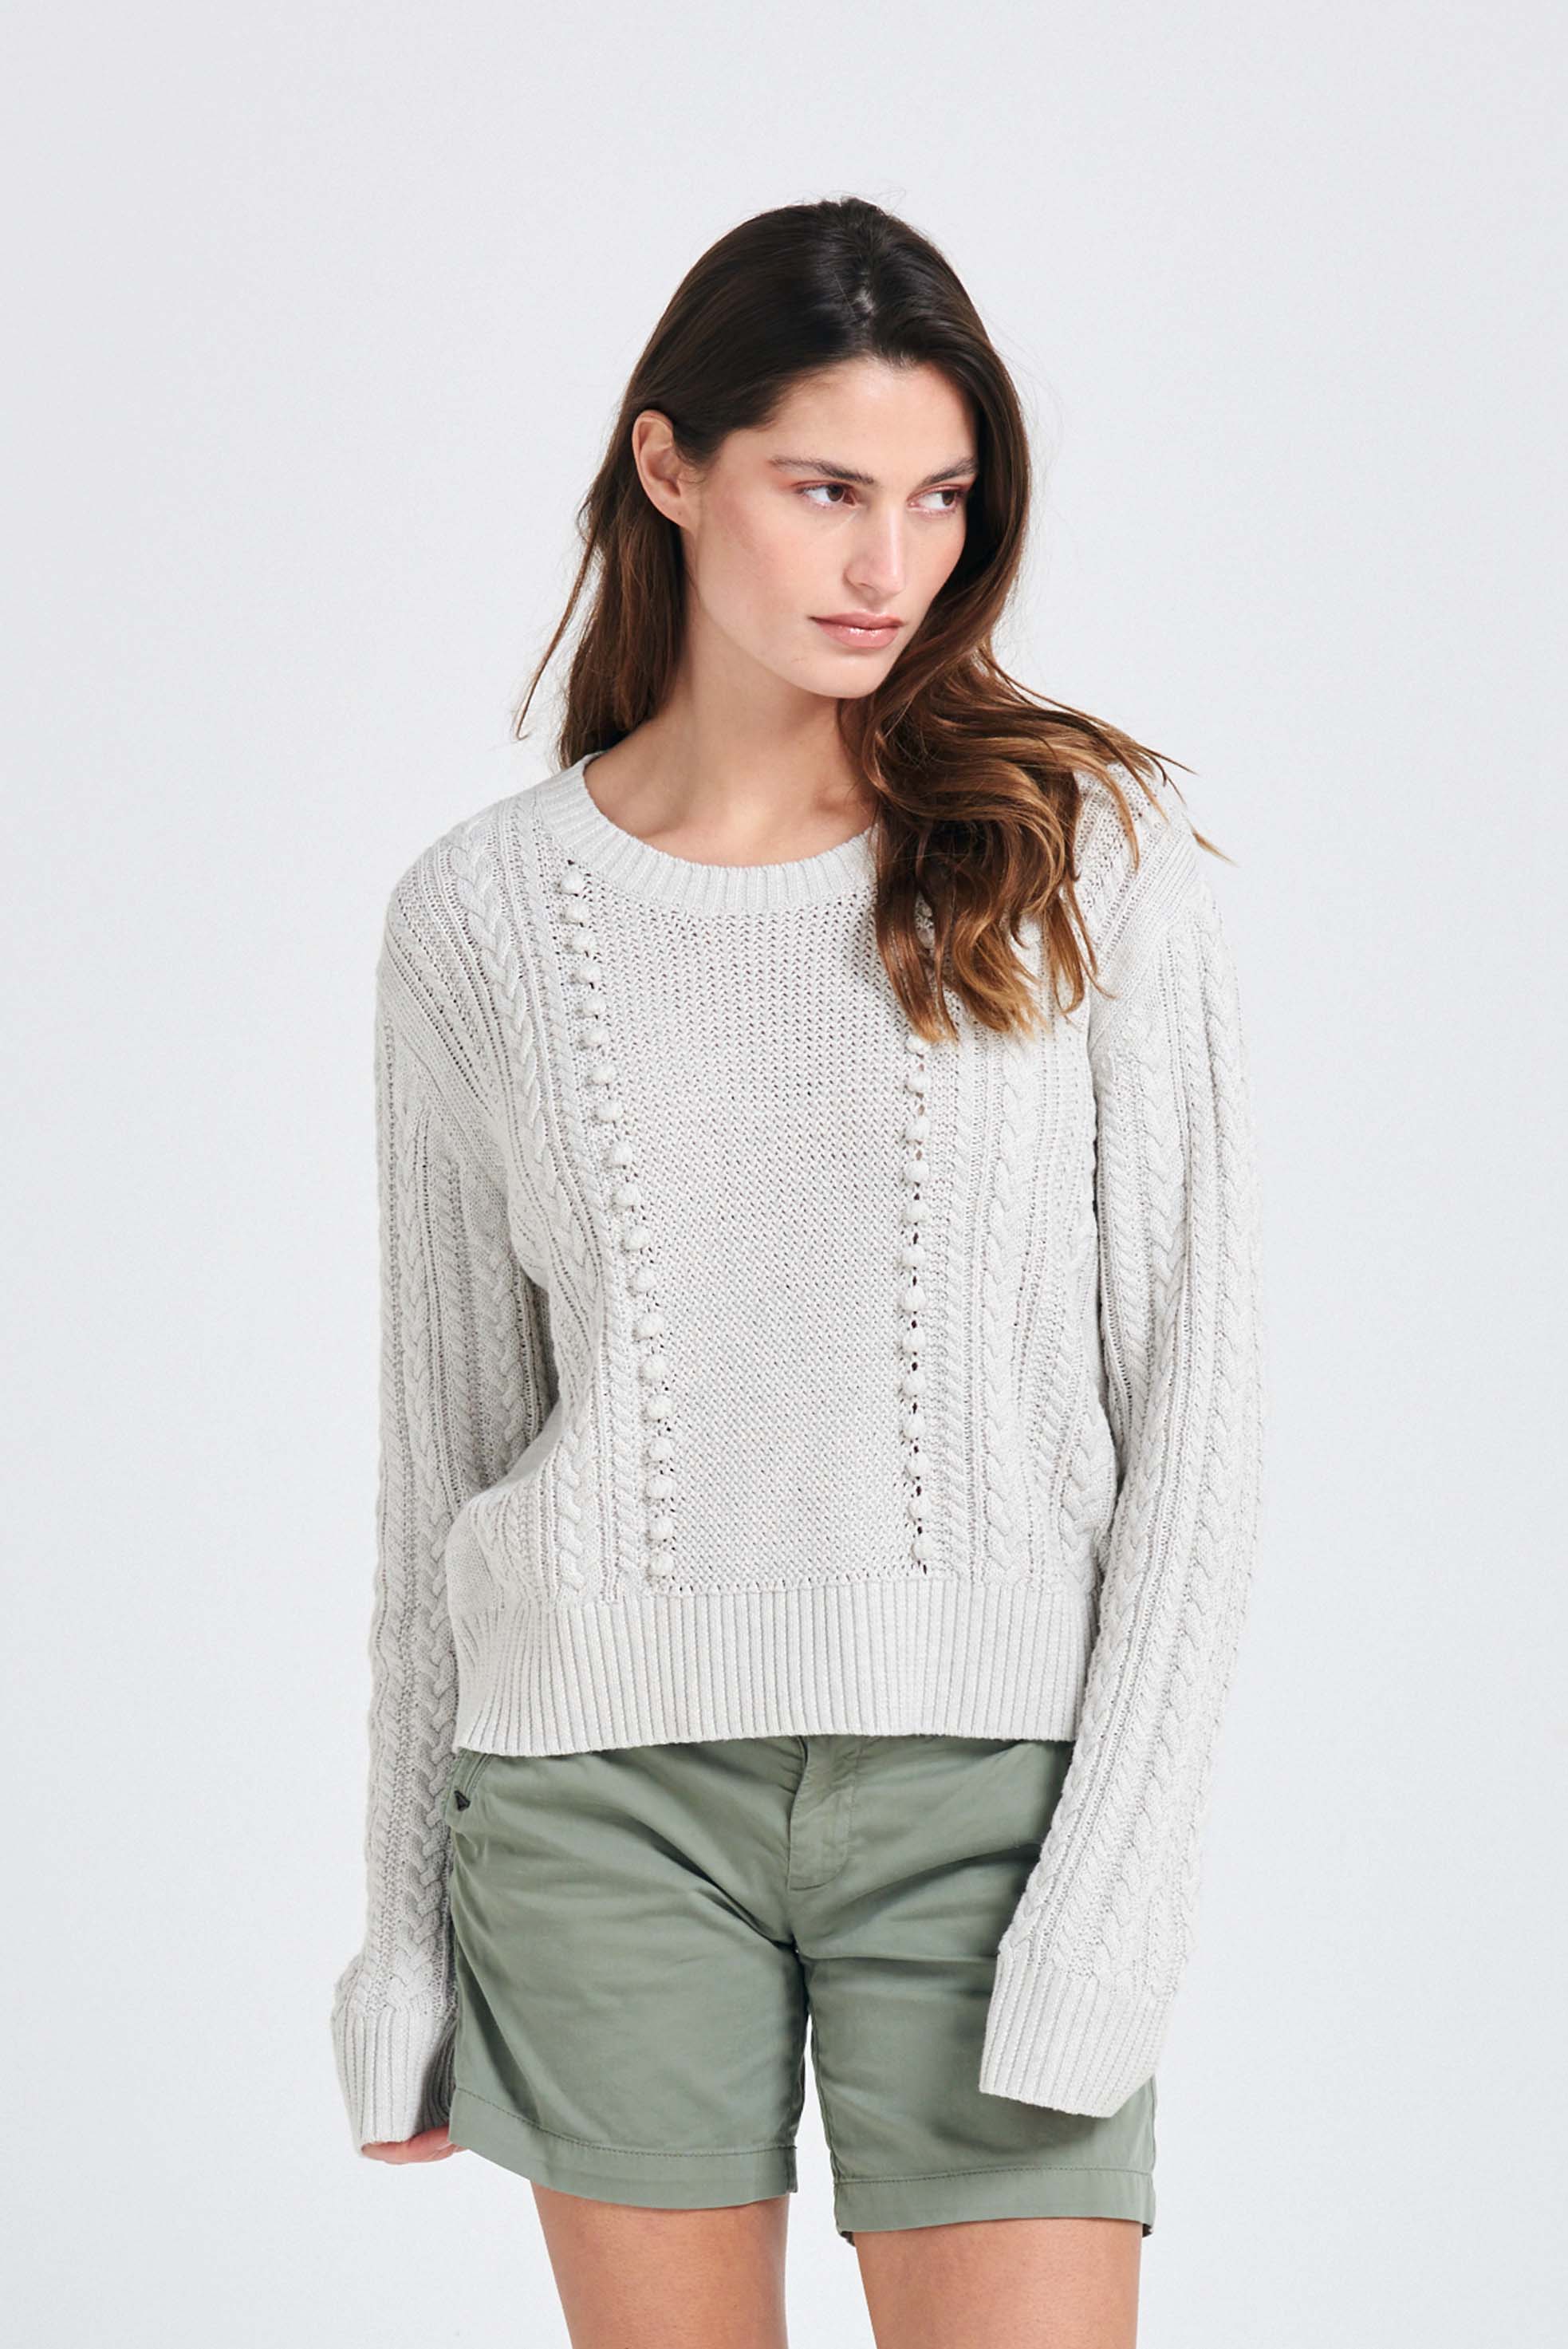 Brown haired female model wearing Jumper1234 Silver marl cotton aran crew neck jumper with a ribbon tie back